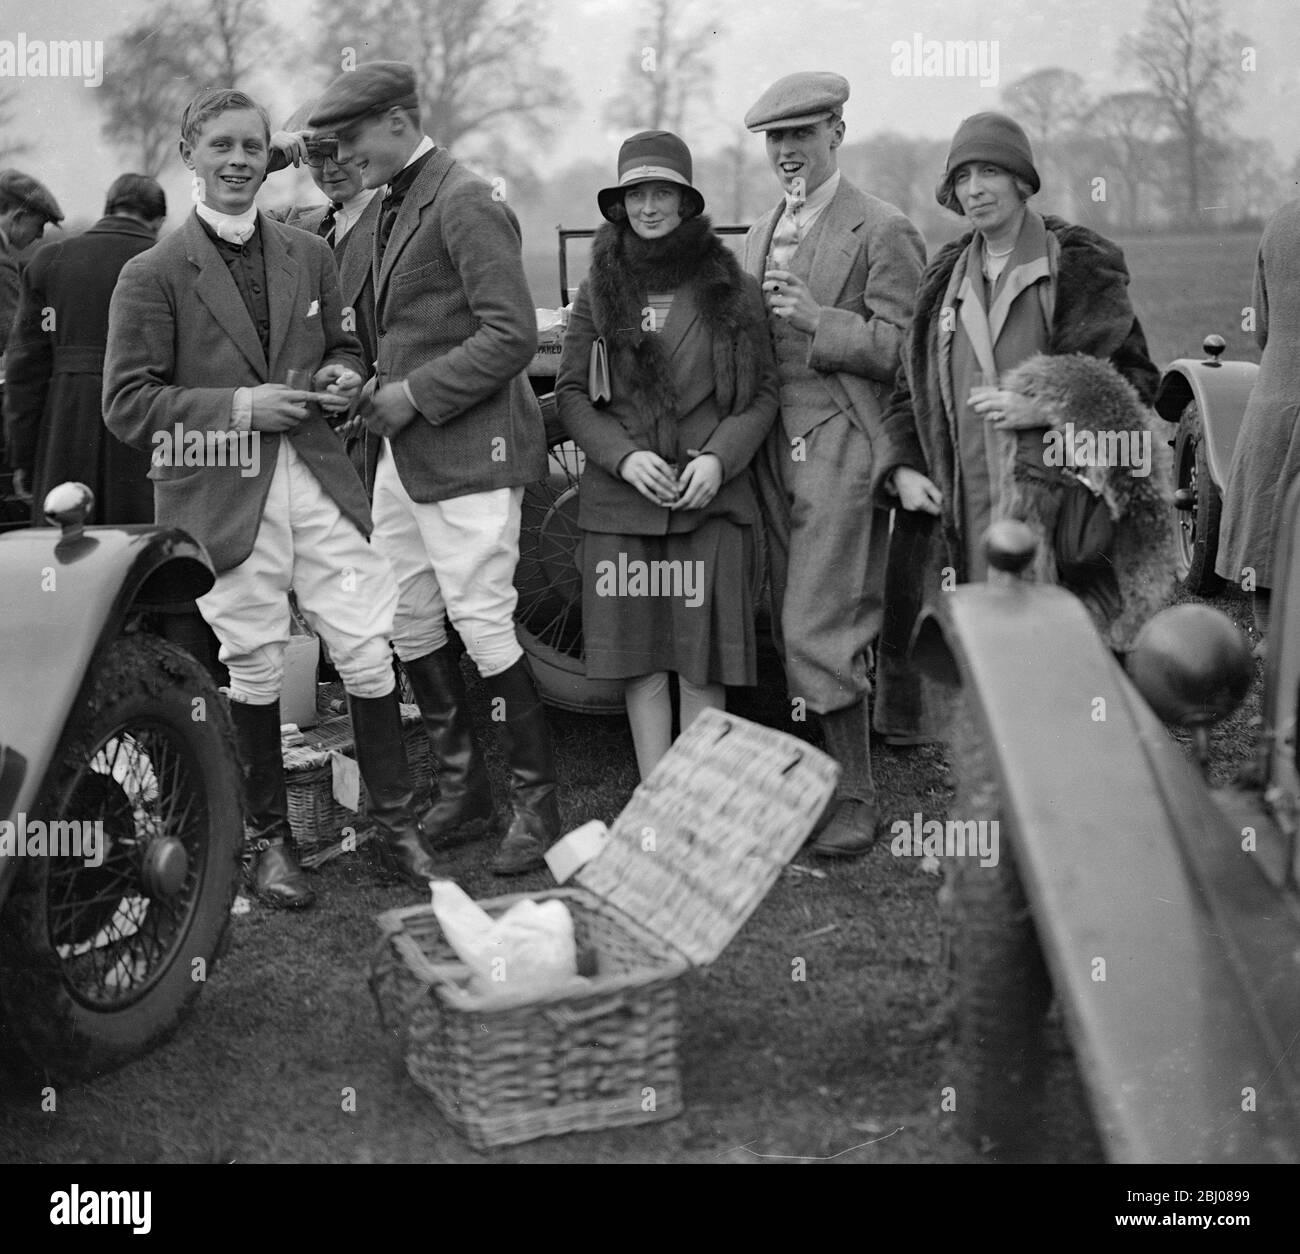 Christ Church & Bullingdon Club Point to Point at Stockham Farm , Wantage . - Honorable Henry Douglas - Home ( left ) , Miss Jean Dundas , Mr Beresford Peirse < Lady Guilford . - 1928 - Stock Photo